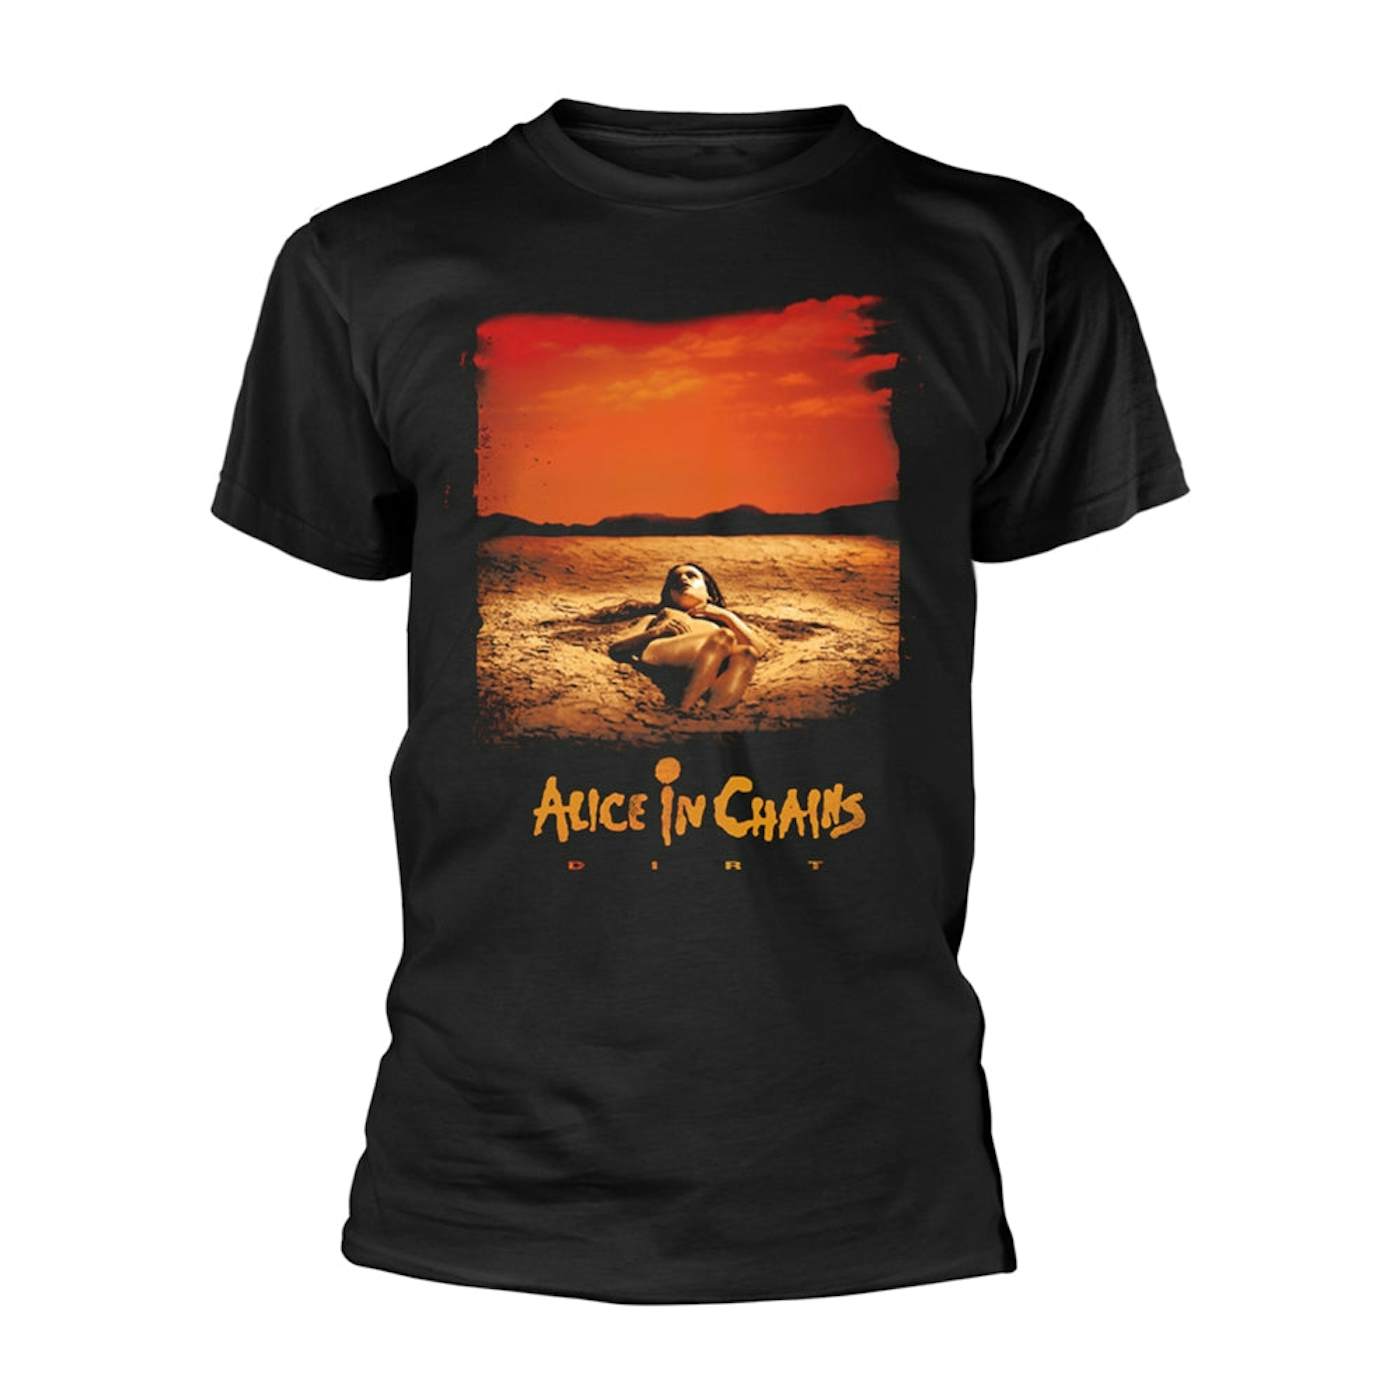 Alice In Chains T Shirt - Dirt (Black)